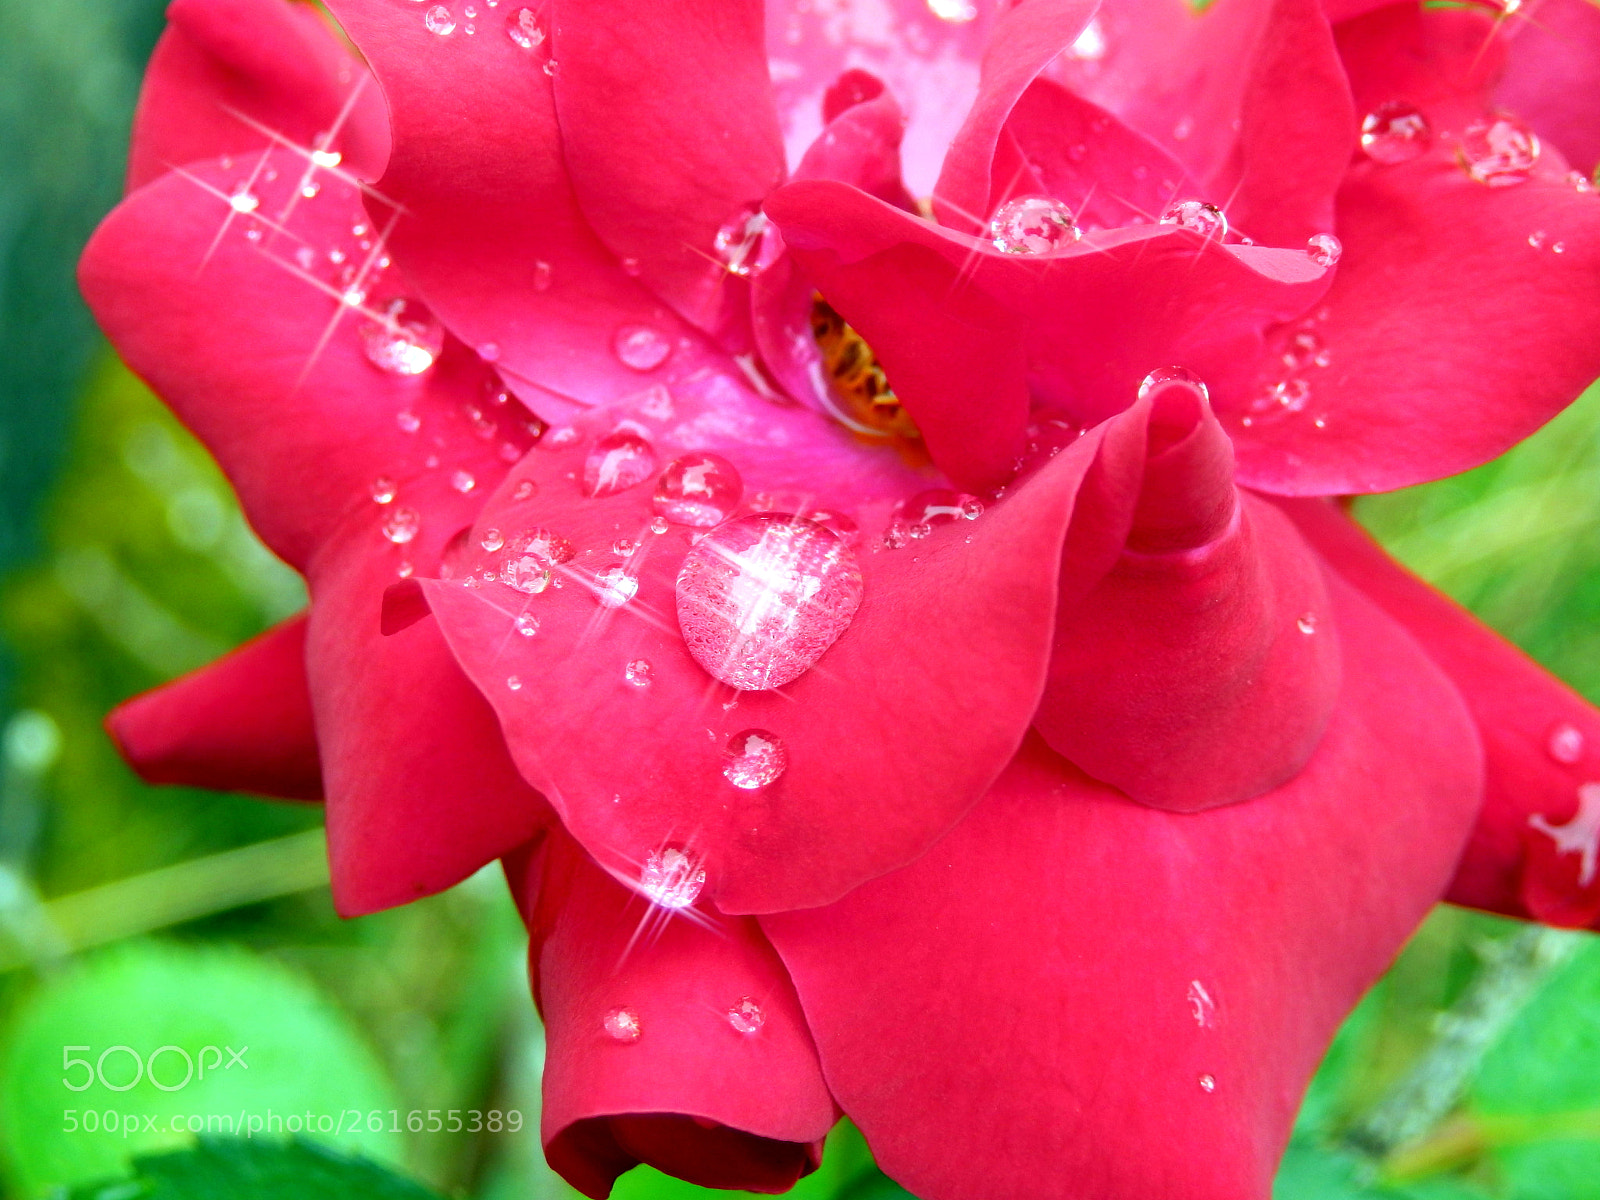 Olympus SZ-31MR sample photo. Droplets on petals photography